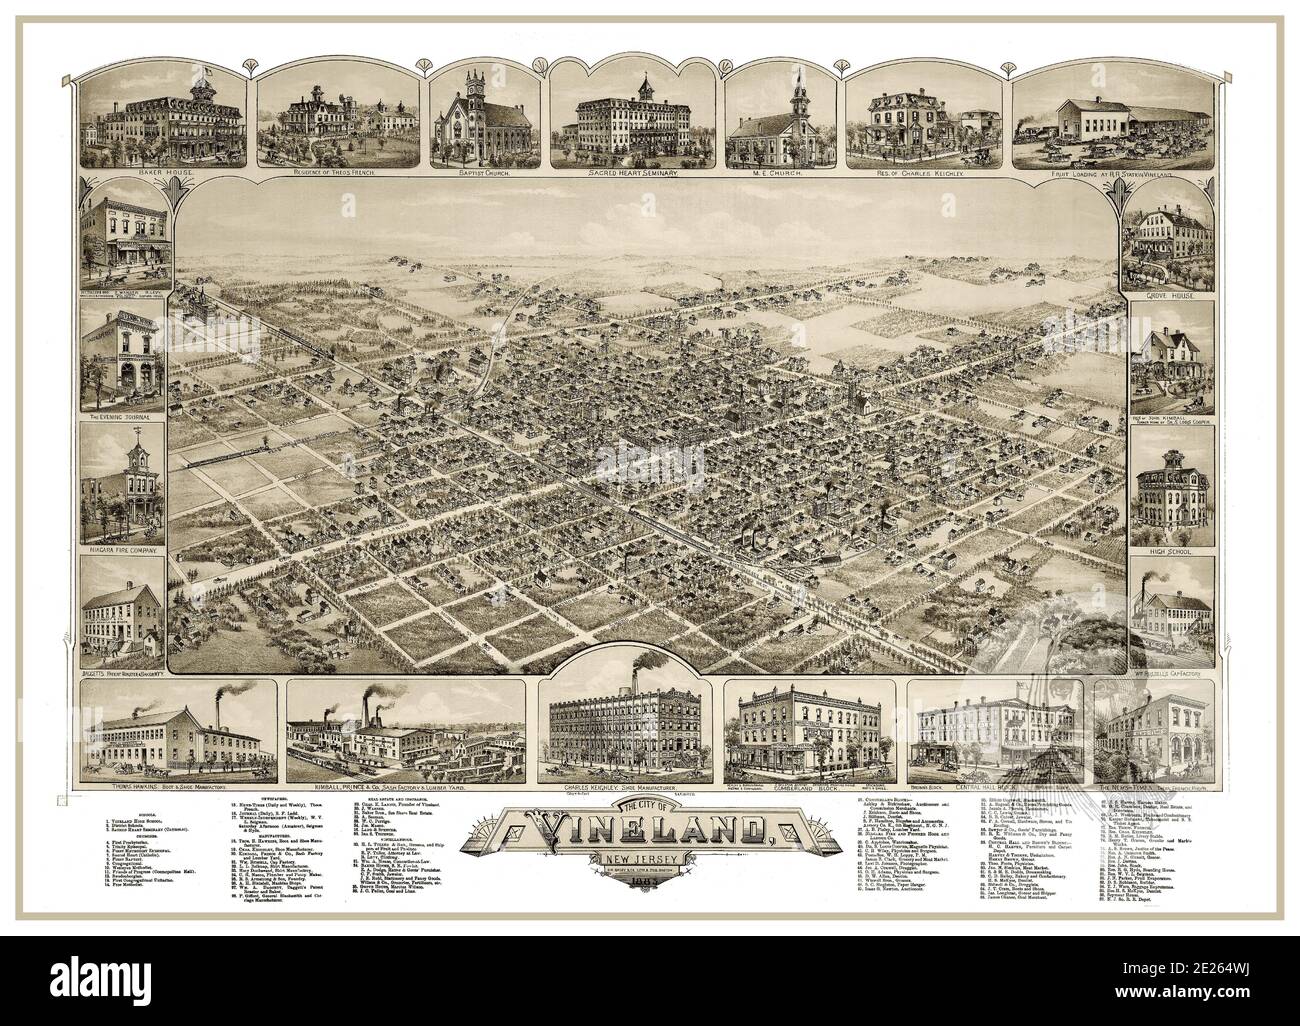 VINELAND MAP 1880’s Vintage historic Lithograph The City of Vineland New Jersey USA 1885 Bird's Eye View with city attractions featured around. New Jersey USA Stock Photo